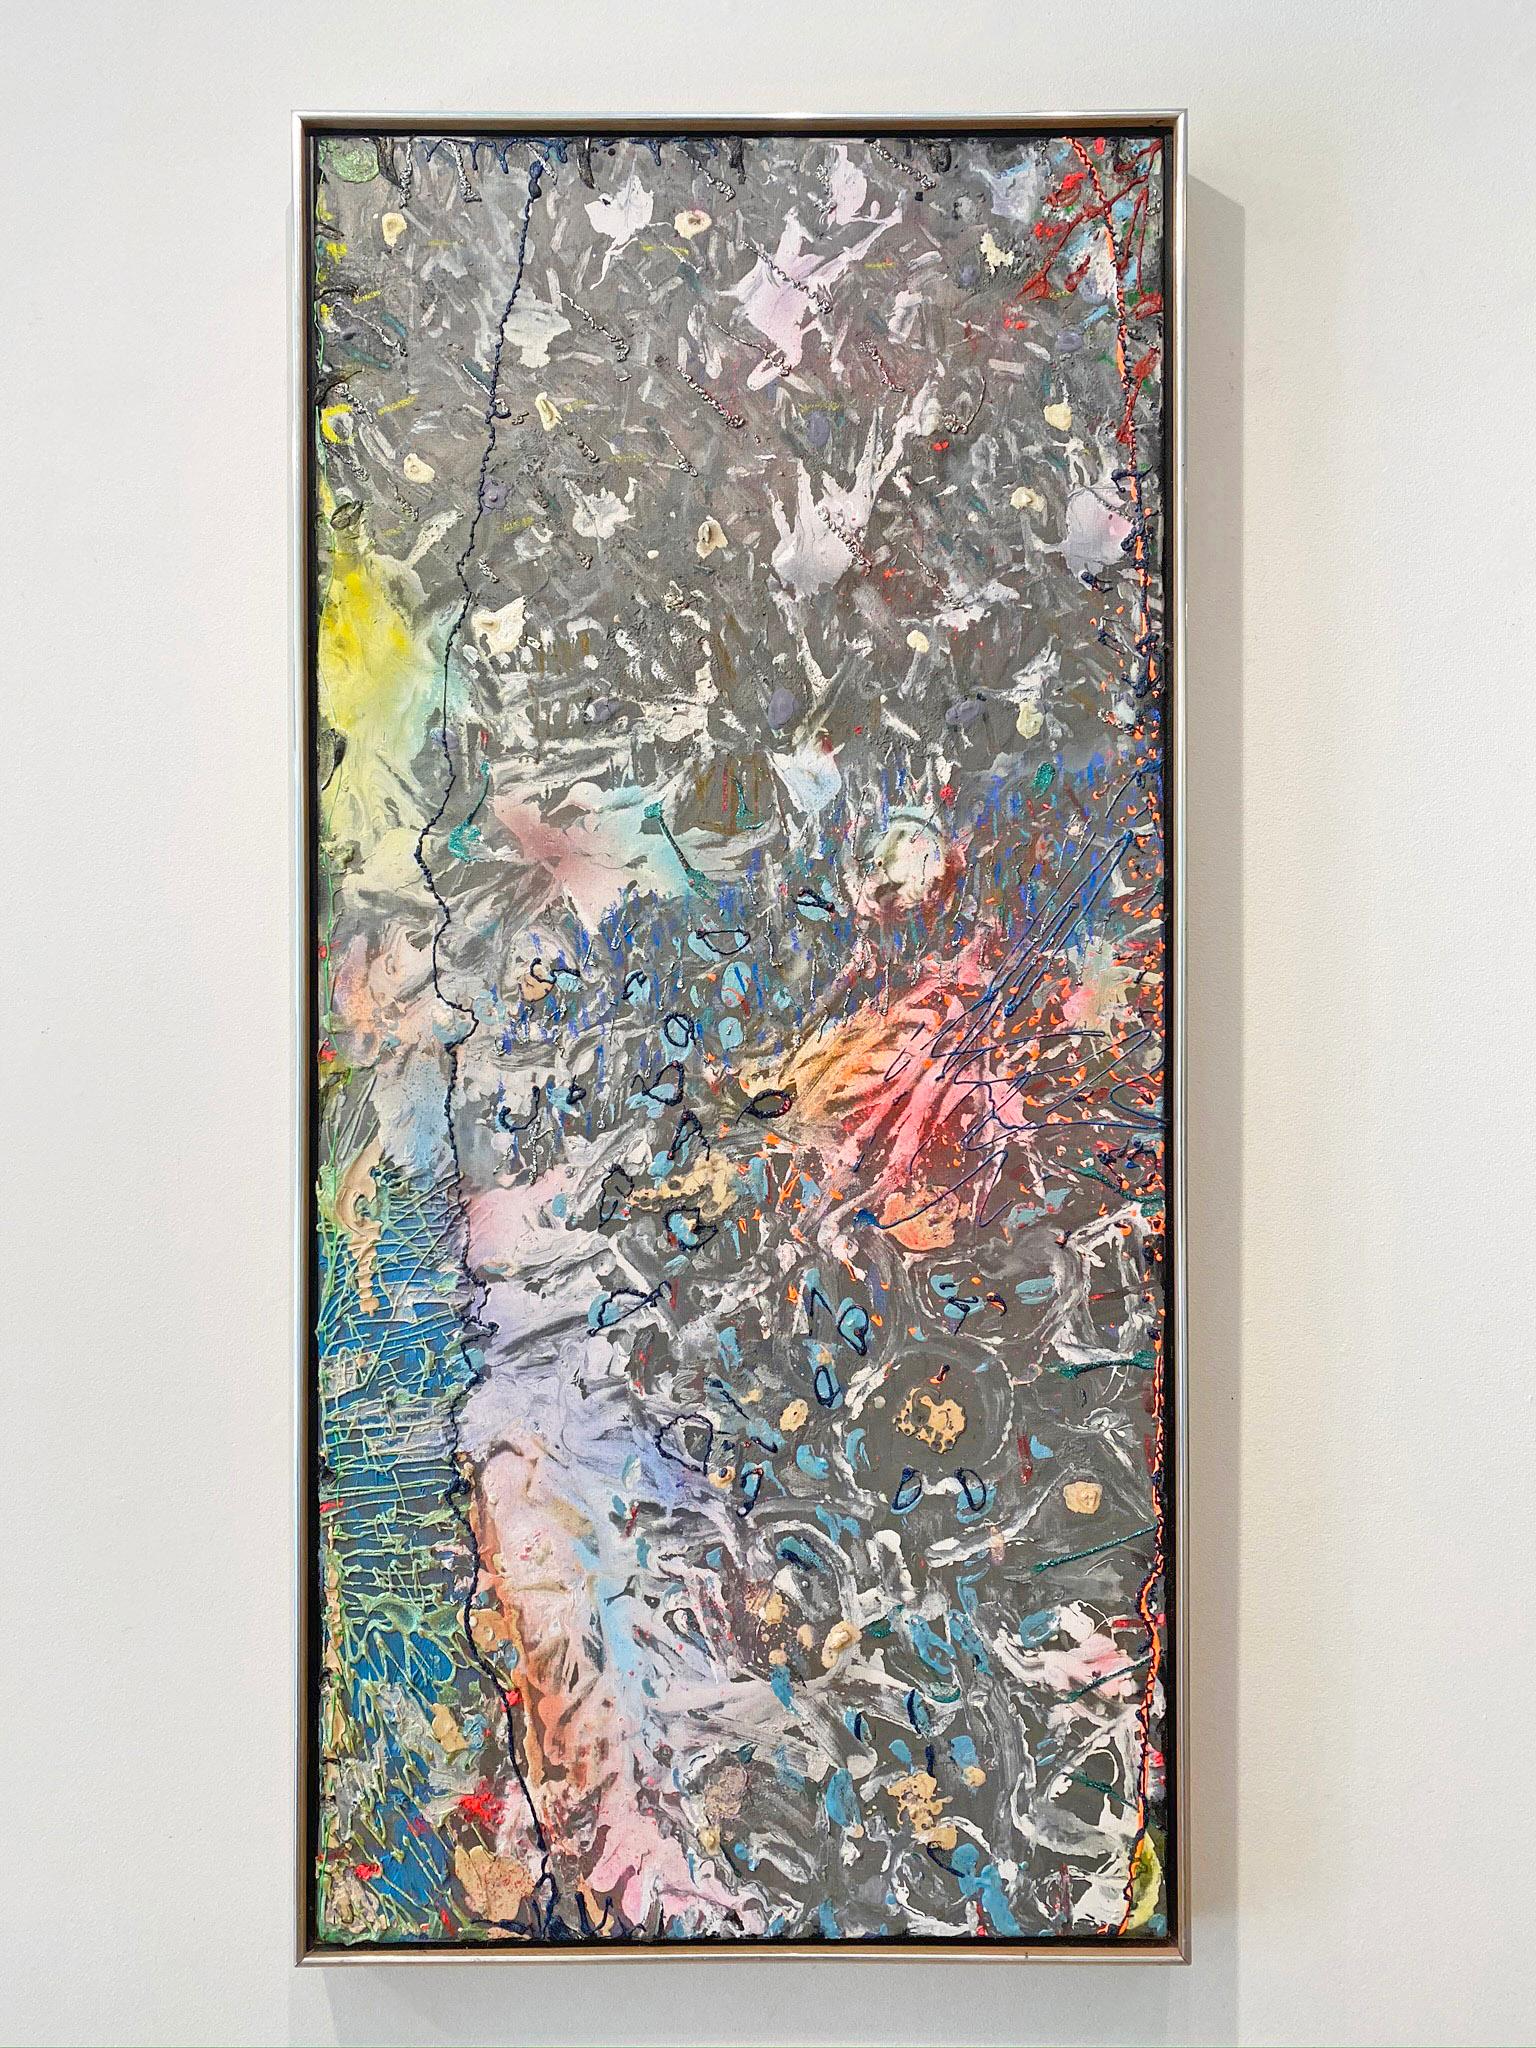 'HeartofAlcamo' by Stanley Boxer, 1989. Oil and mixed media on canvas, 51 x 24 in. / Frame: 52.25 x 25.25 in.  This impasto painting has an active surface that is thickly painted with defined brush strokes in a color palette of grey, yellow, pink,